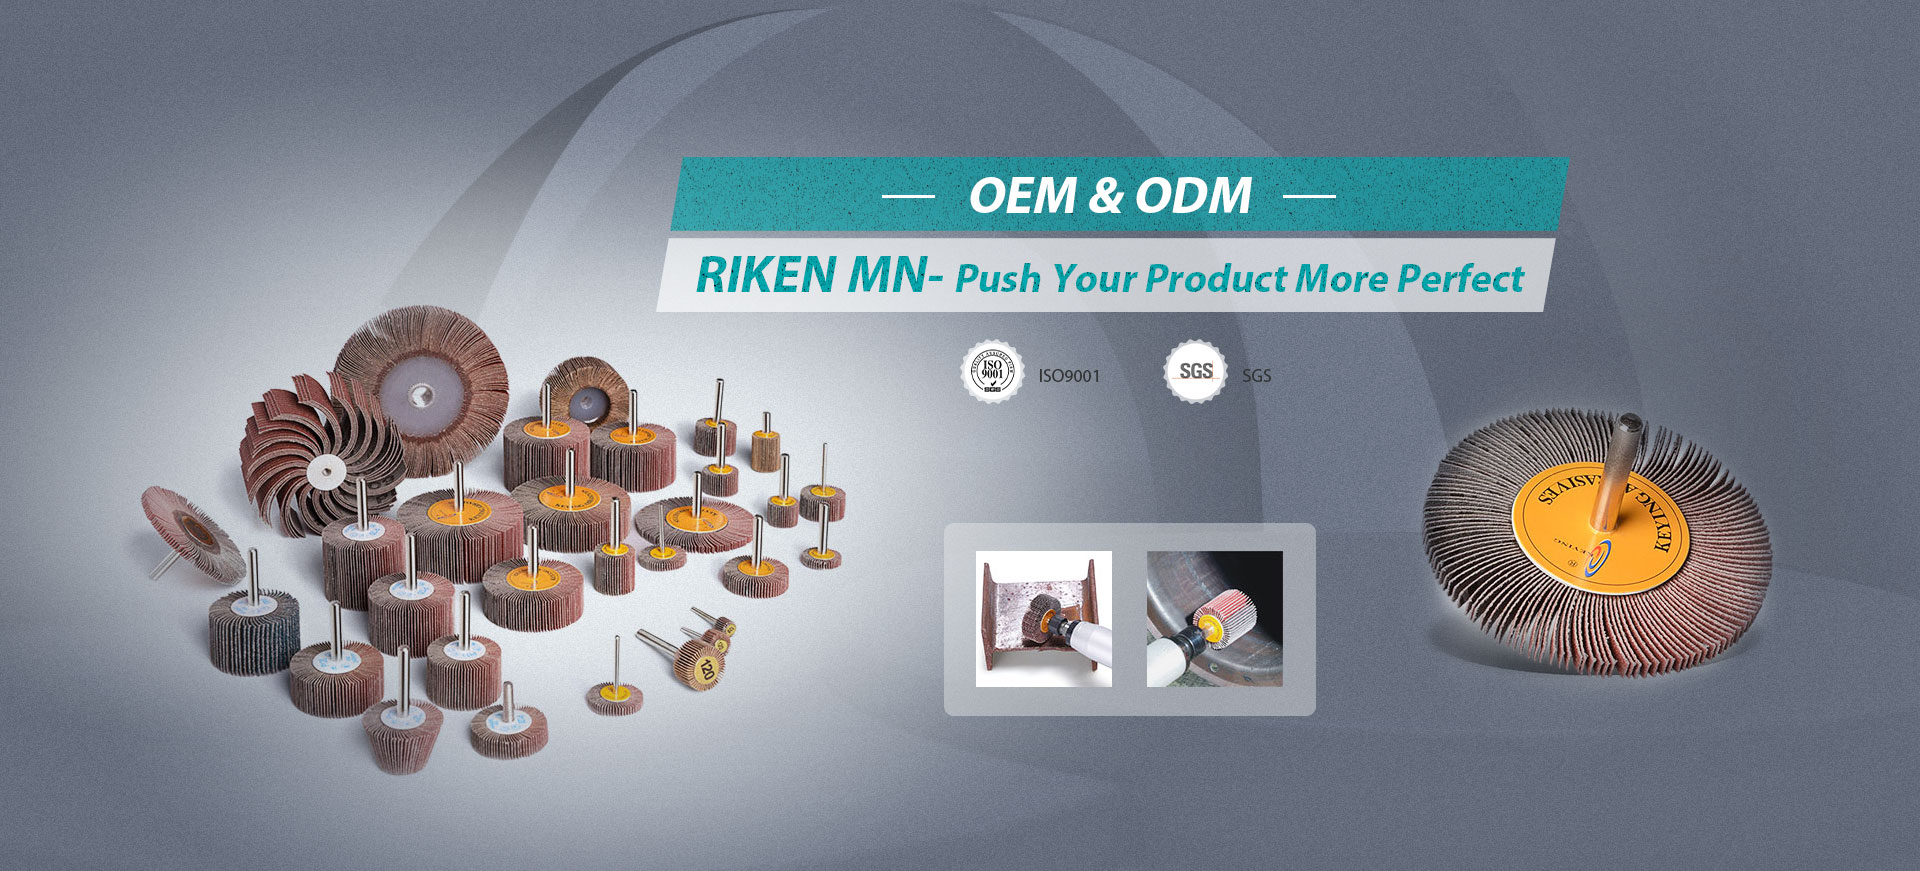 OEM & ODM RIKEN MN- Push your product more perfect